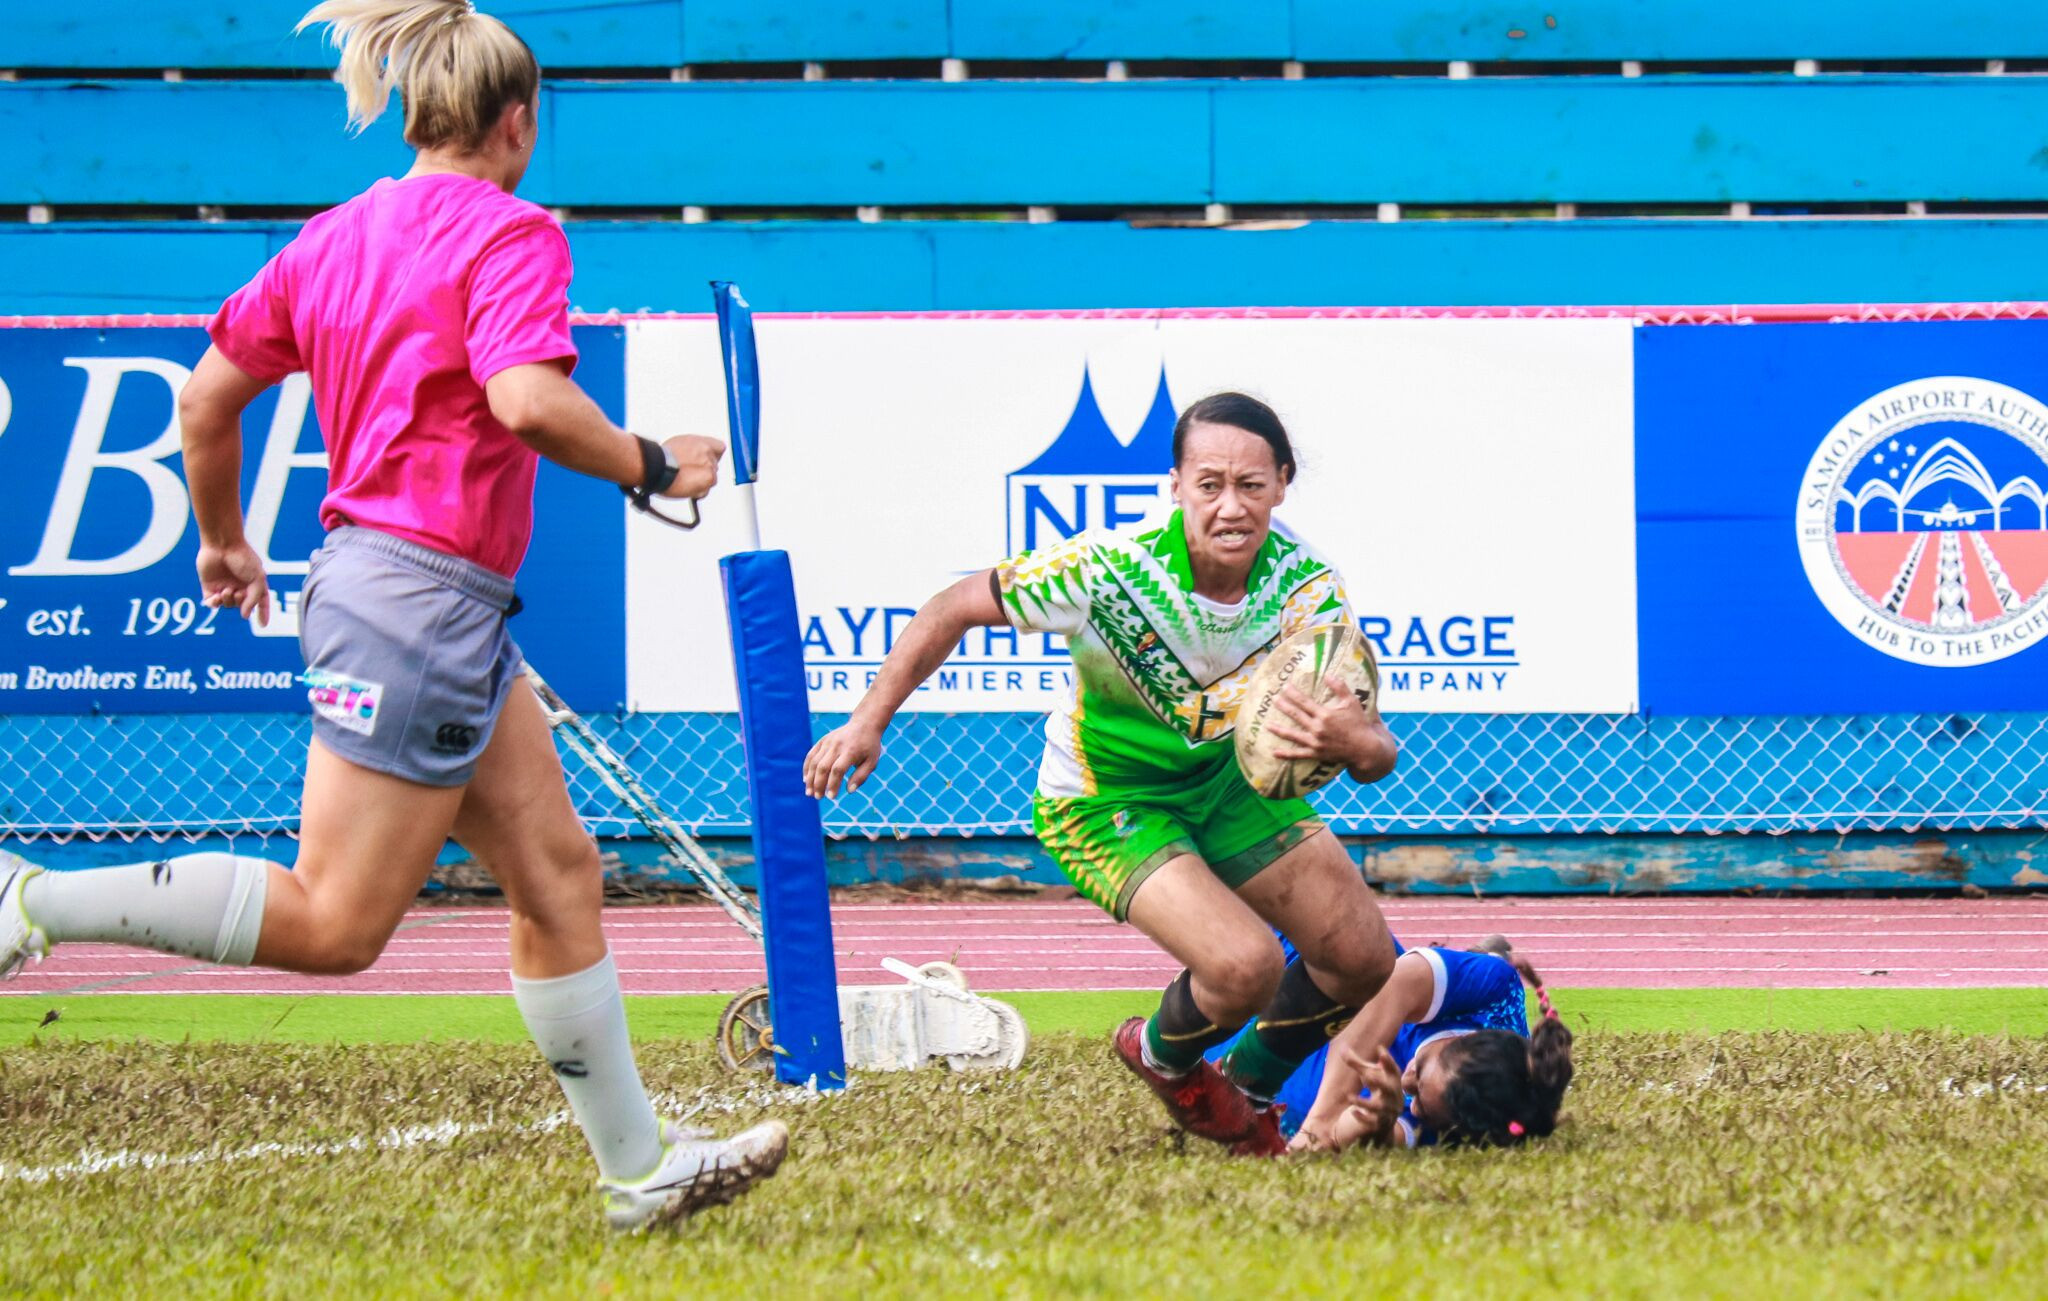 History was made earlier today with the first women's rugby league nines matches taking place at the Pacific Games ©Games News Service